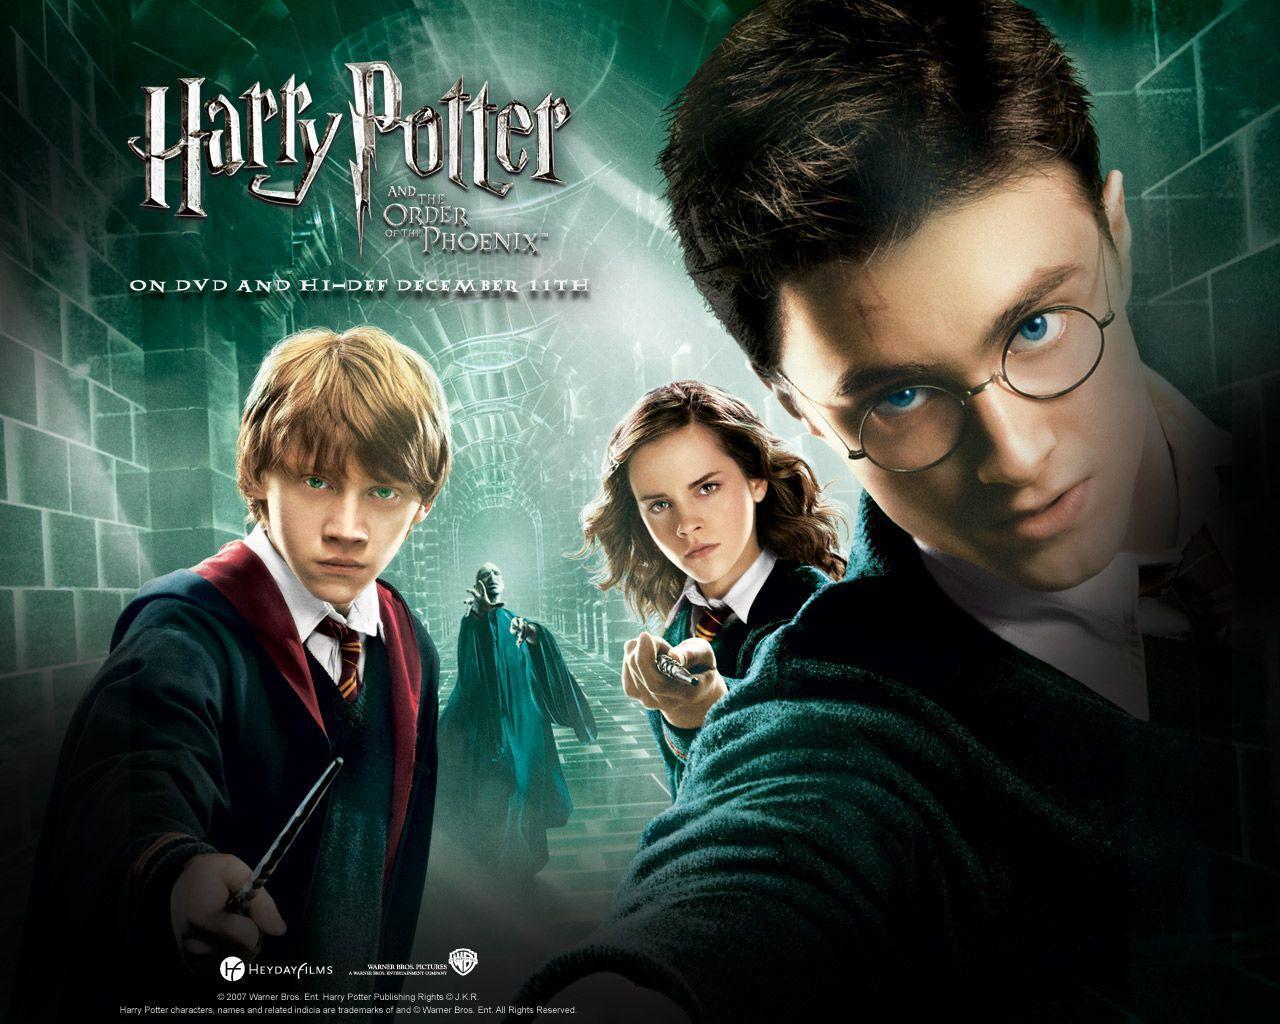 Download the Harry Potter 9 Wallpaper, Harry Potter 9 iPhone